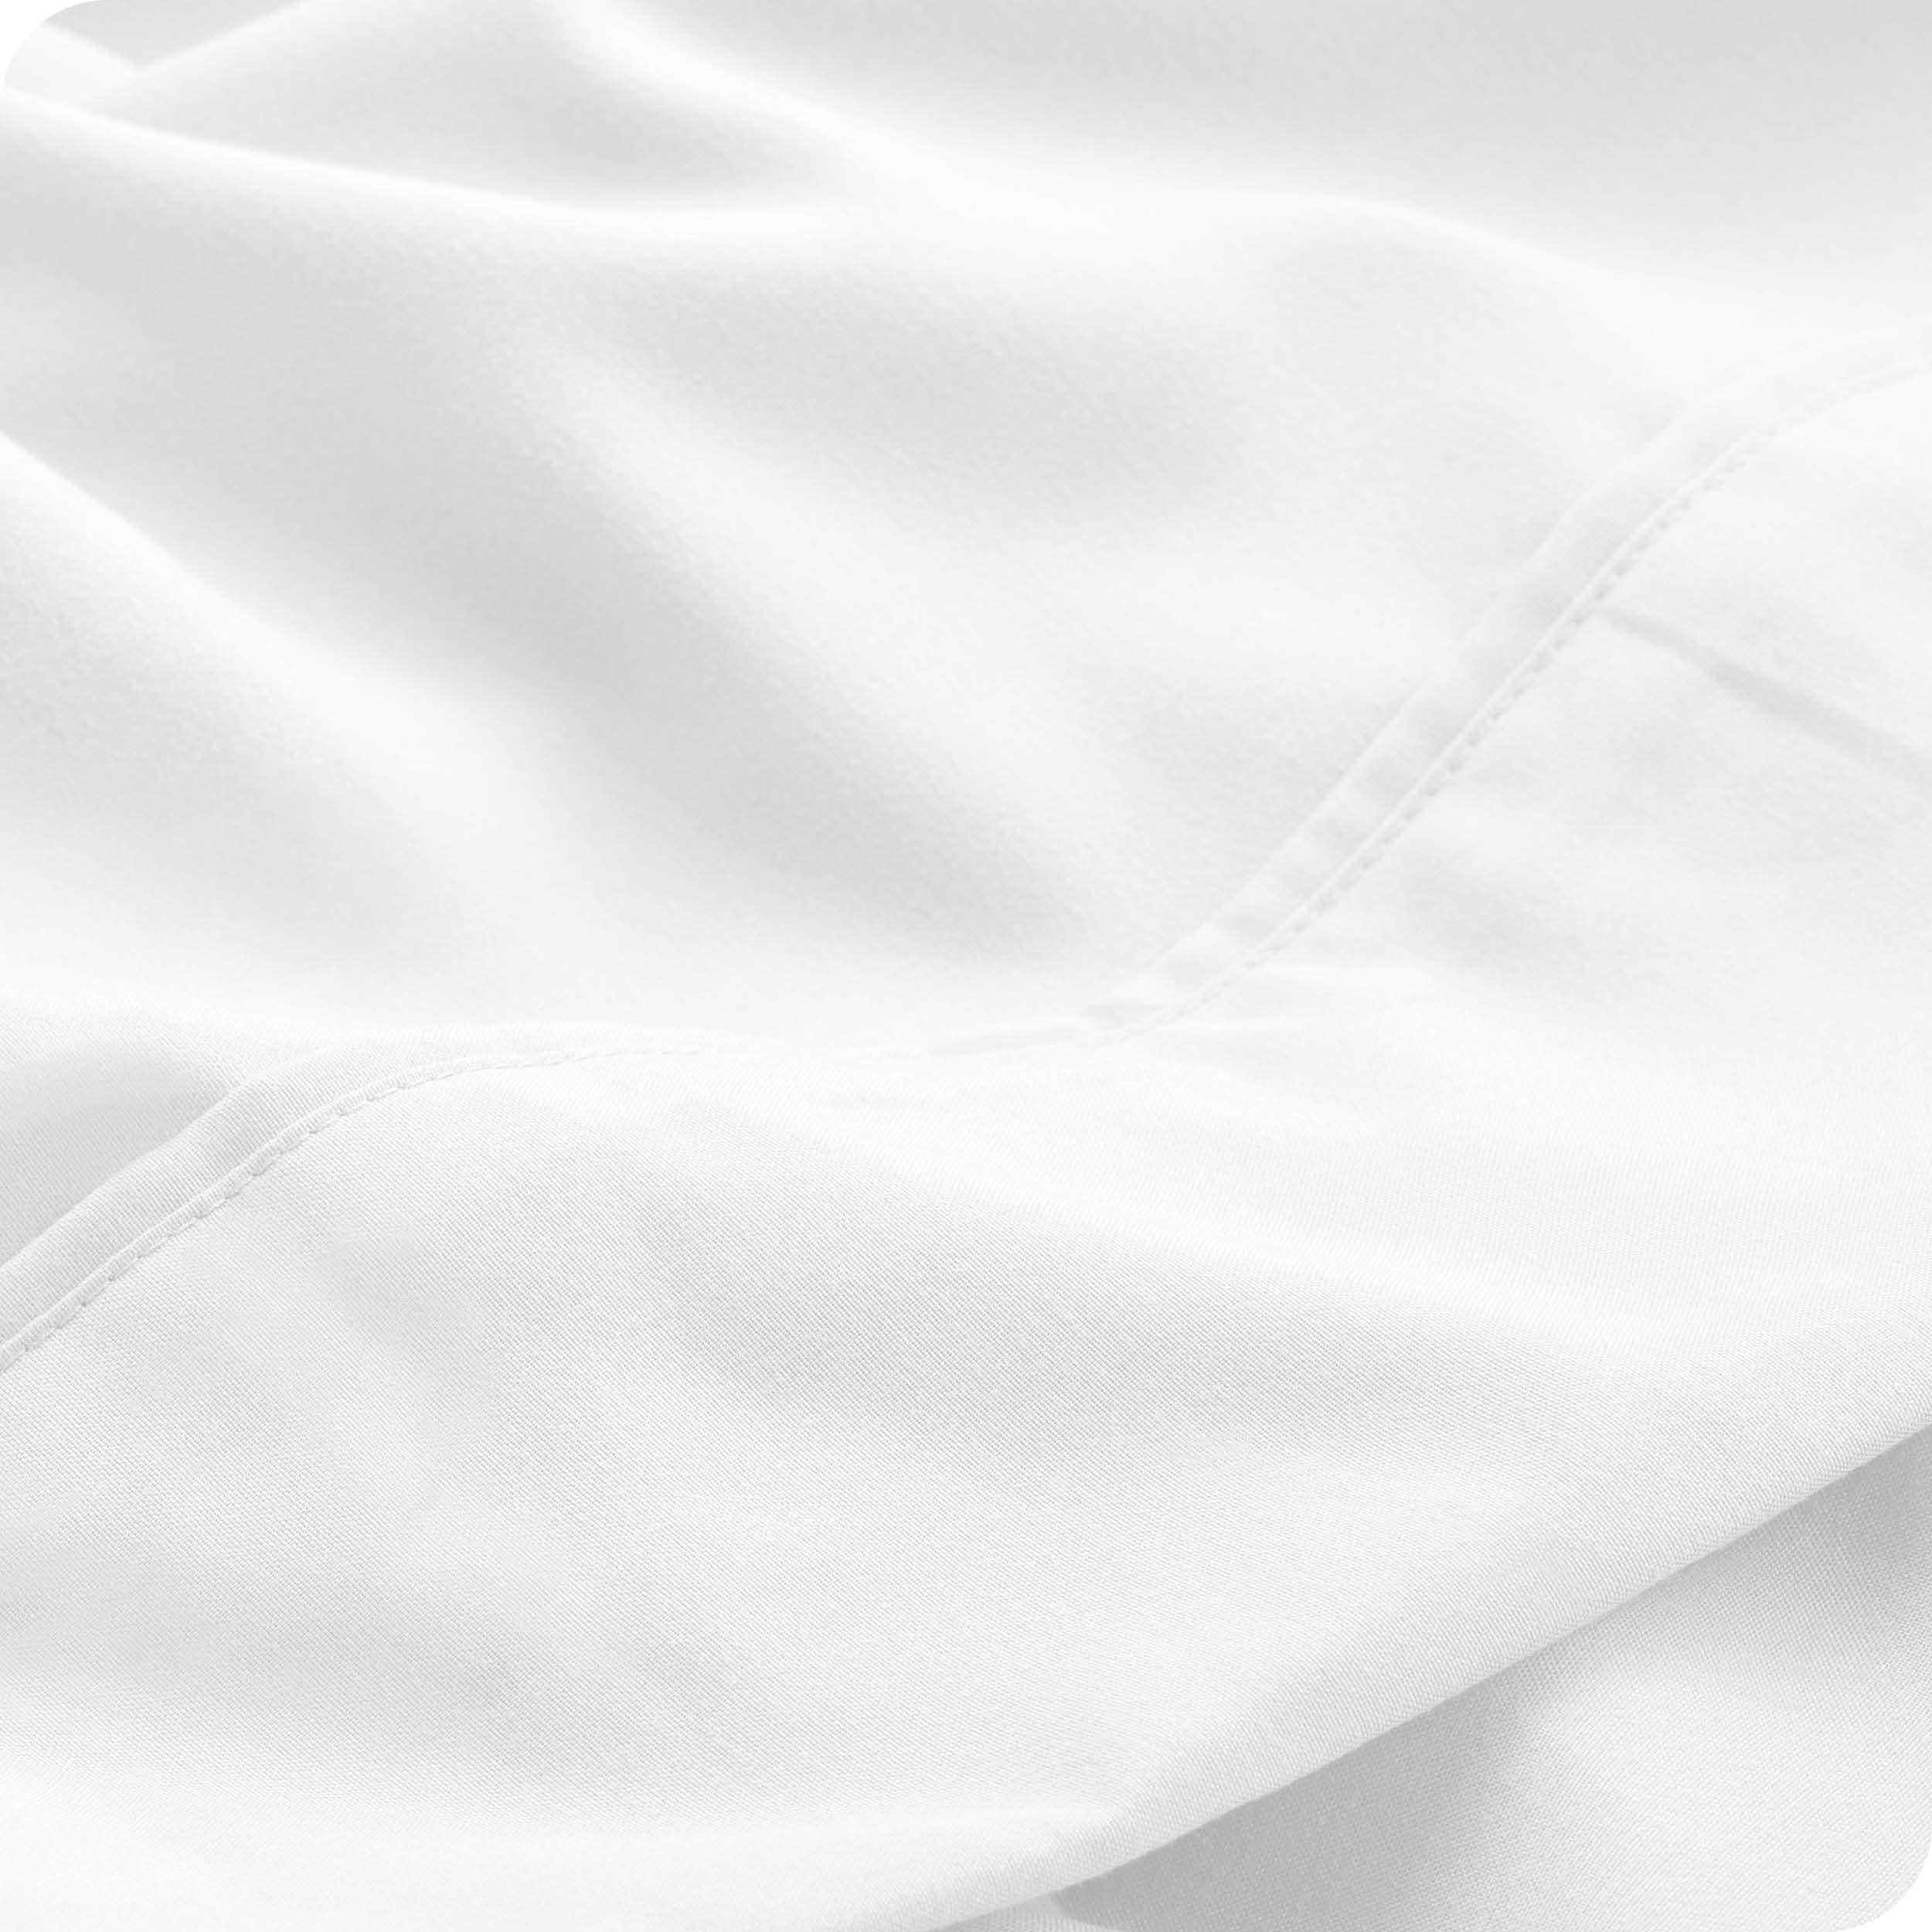 Close up of a white microfiber sheet showing the stitching and texture